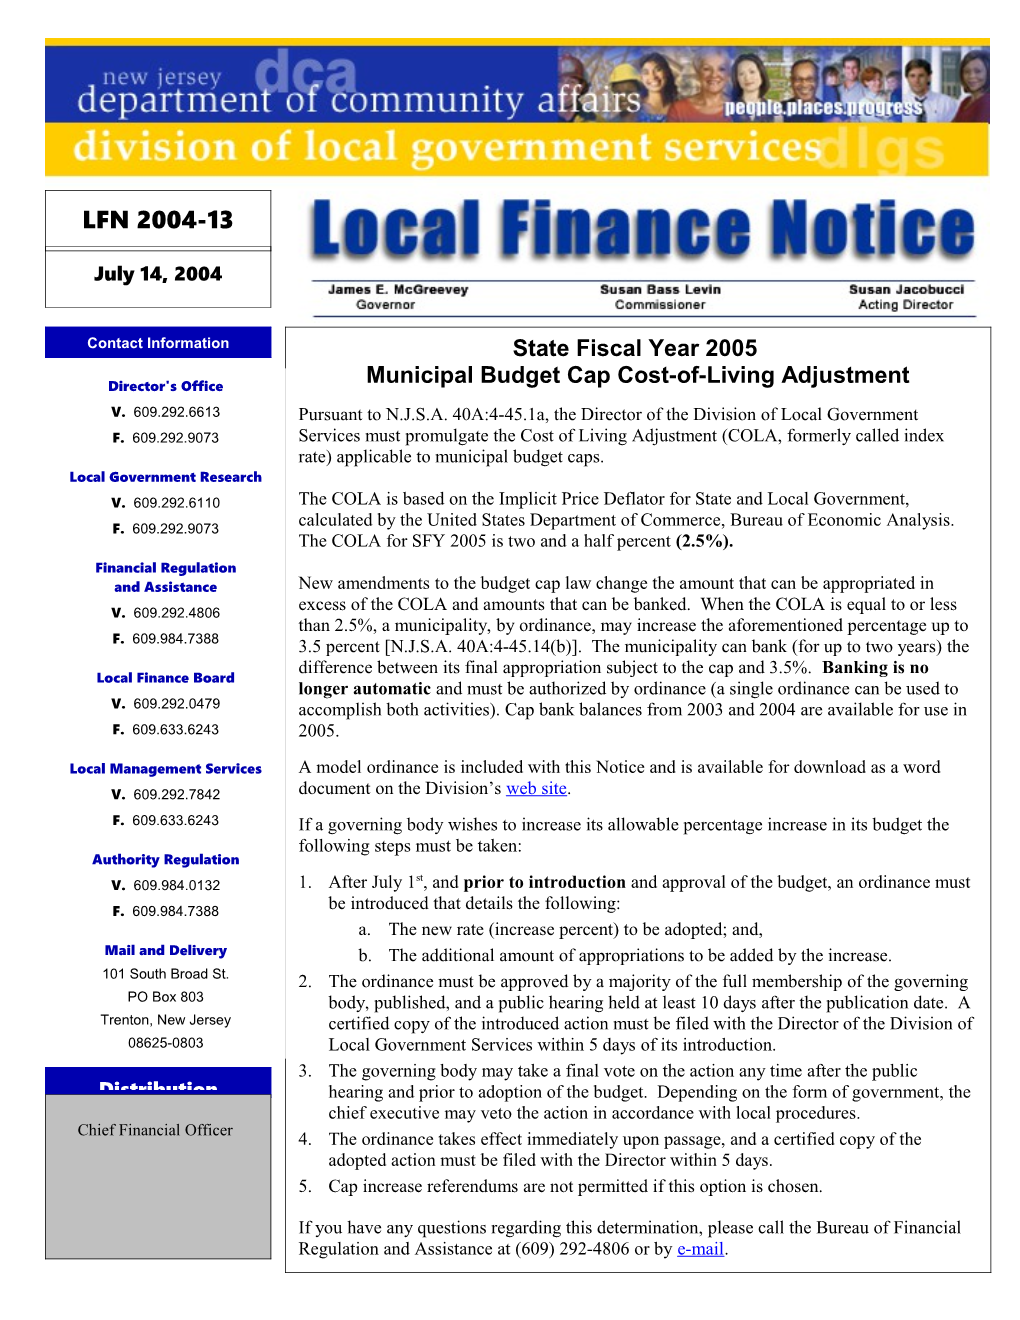 Local Finance Notice 2004-13July 14, 2004Page 1